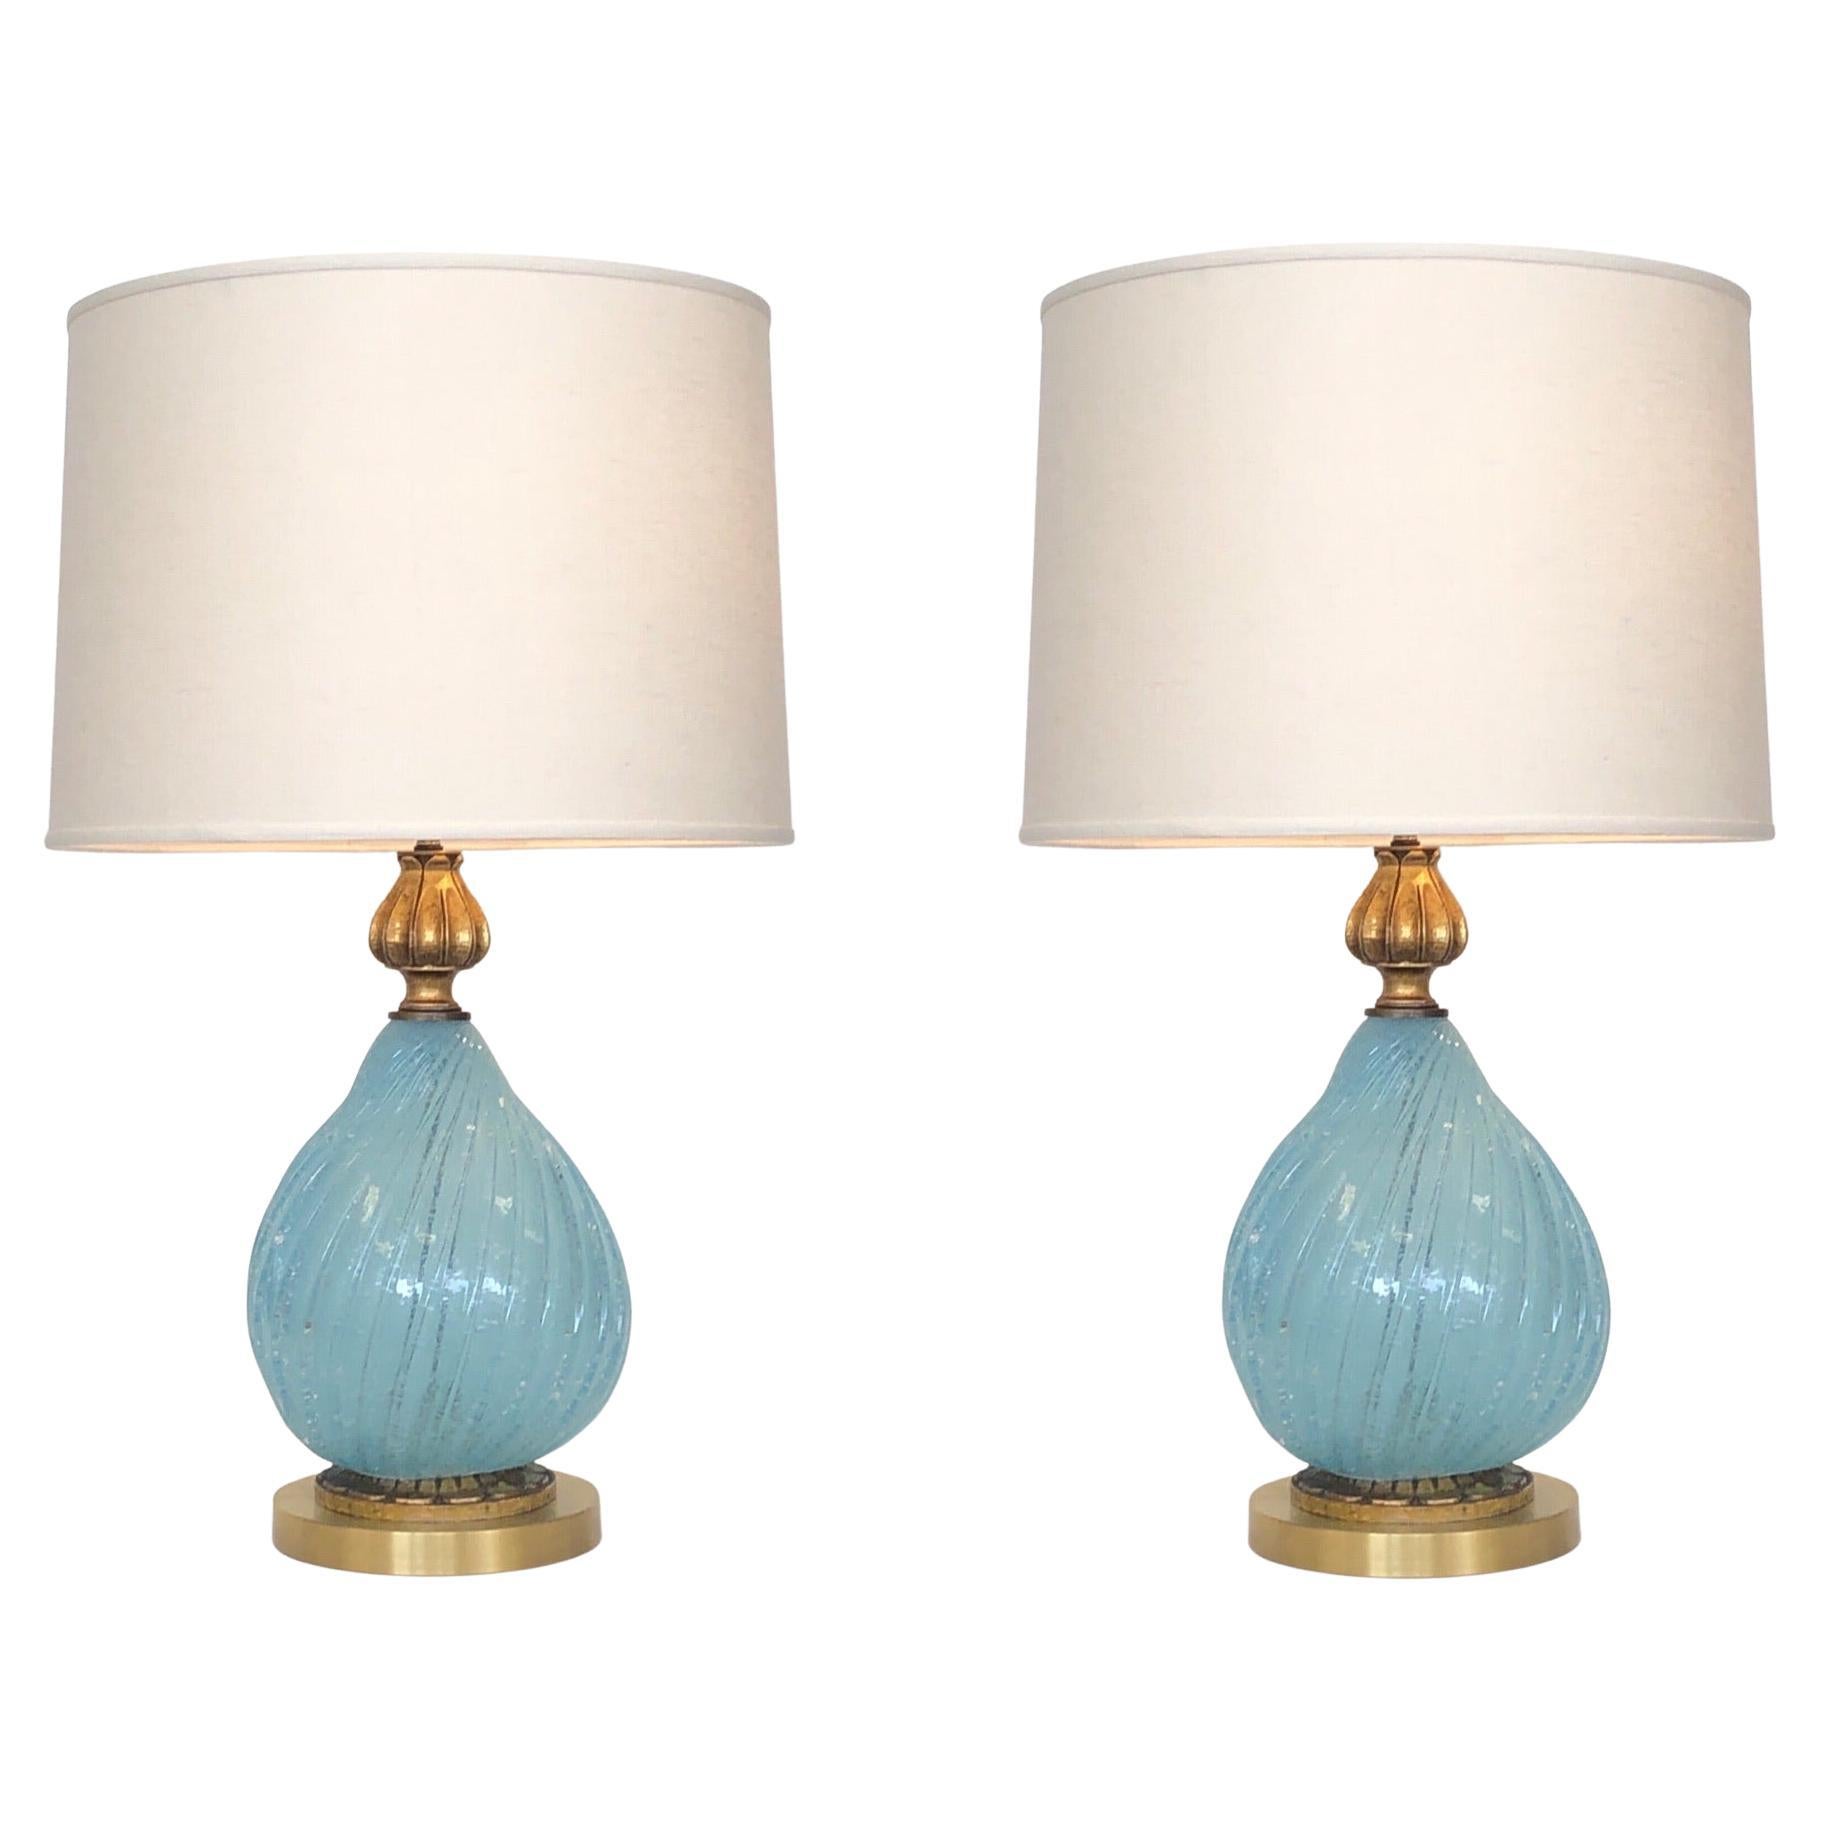 Pair of Italian Powder Blue Murano Glass and Brass Table Lamps 